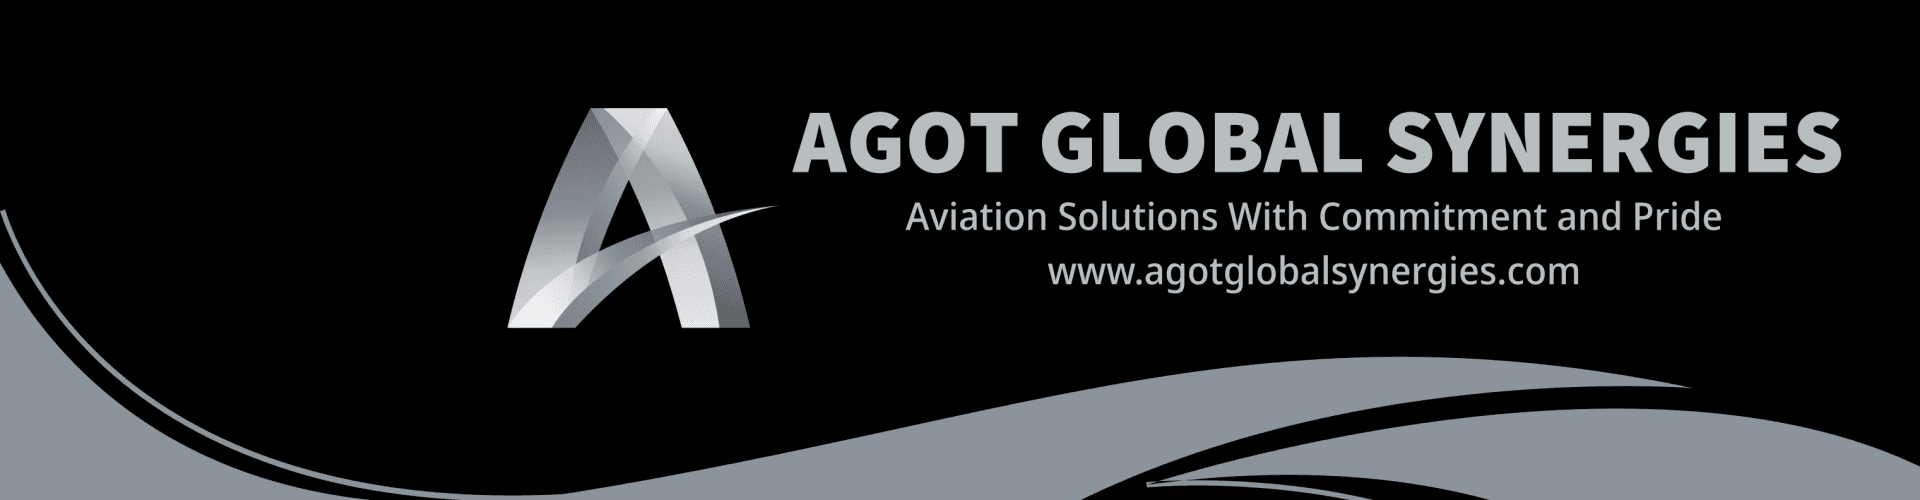 AGOT Global Synergies Ltd cover